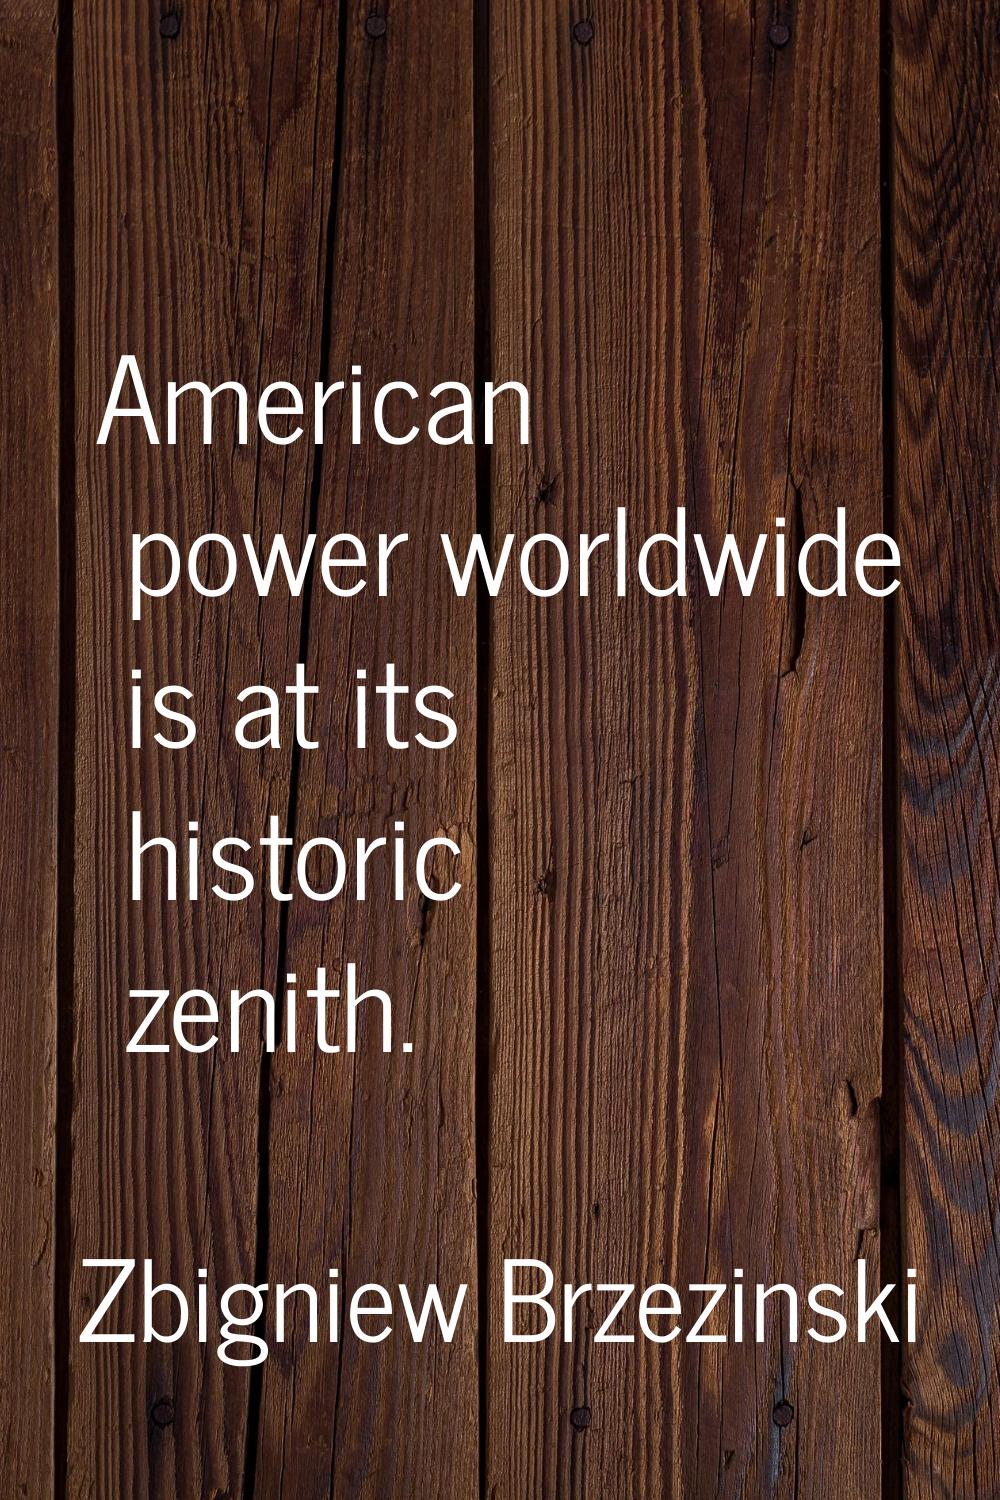 American power worldwide is at its historic zenith.